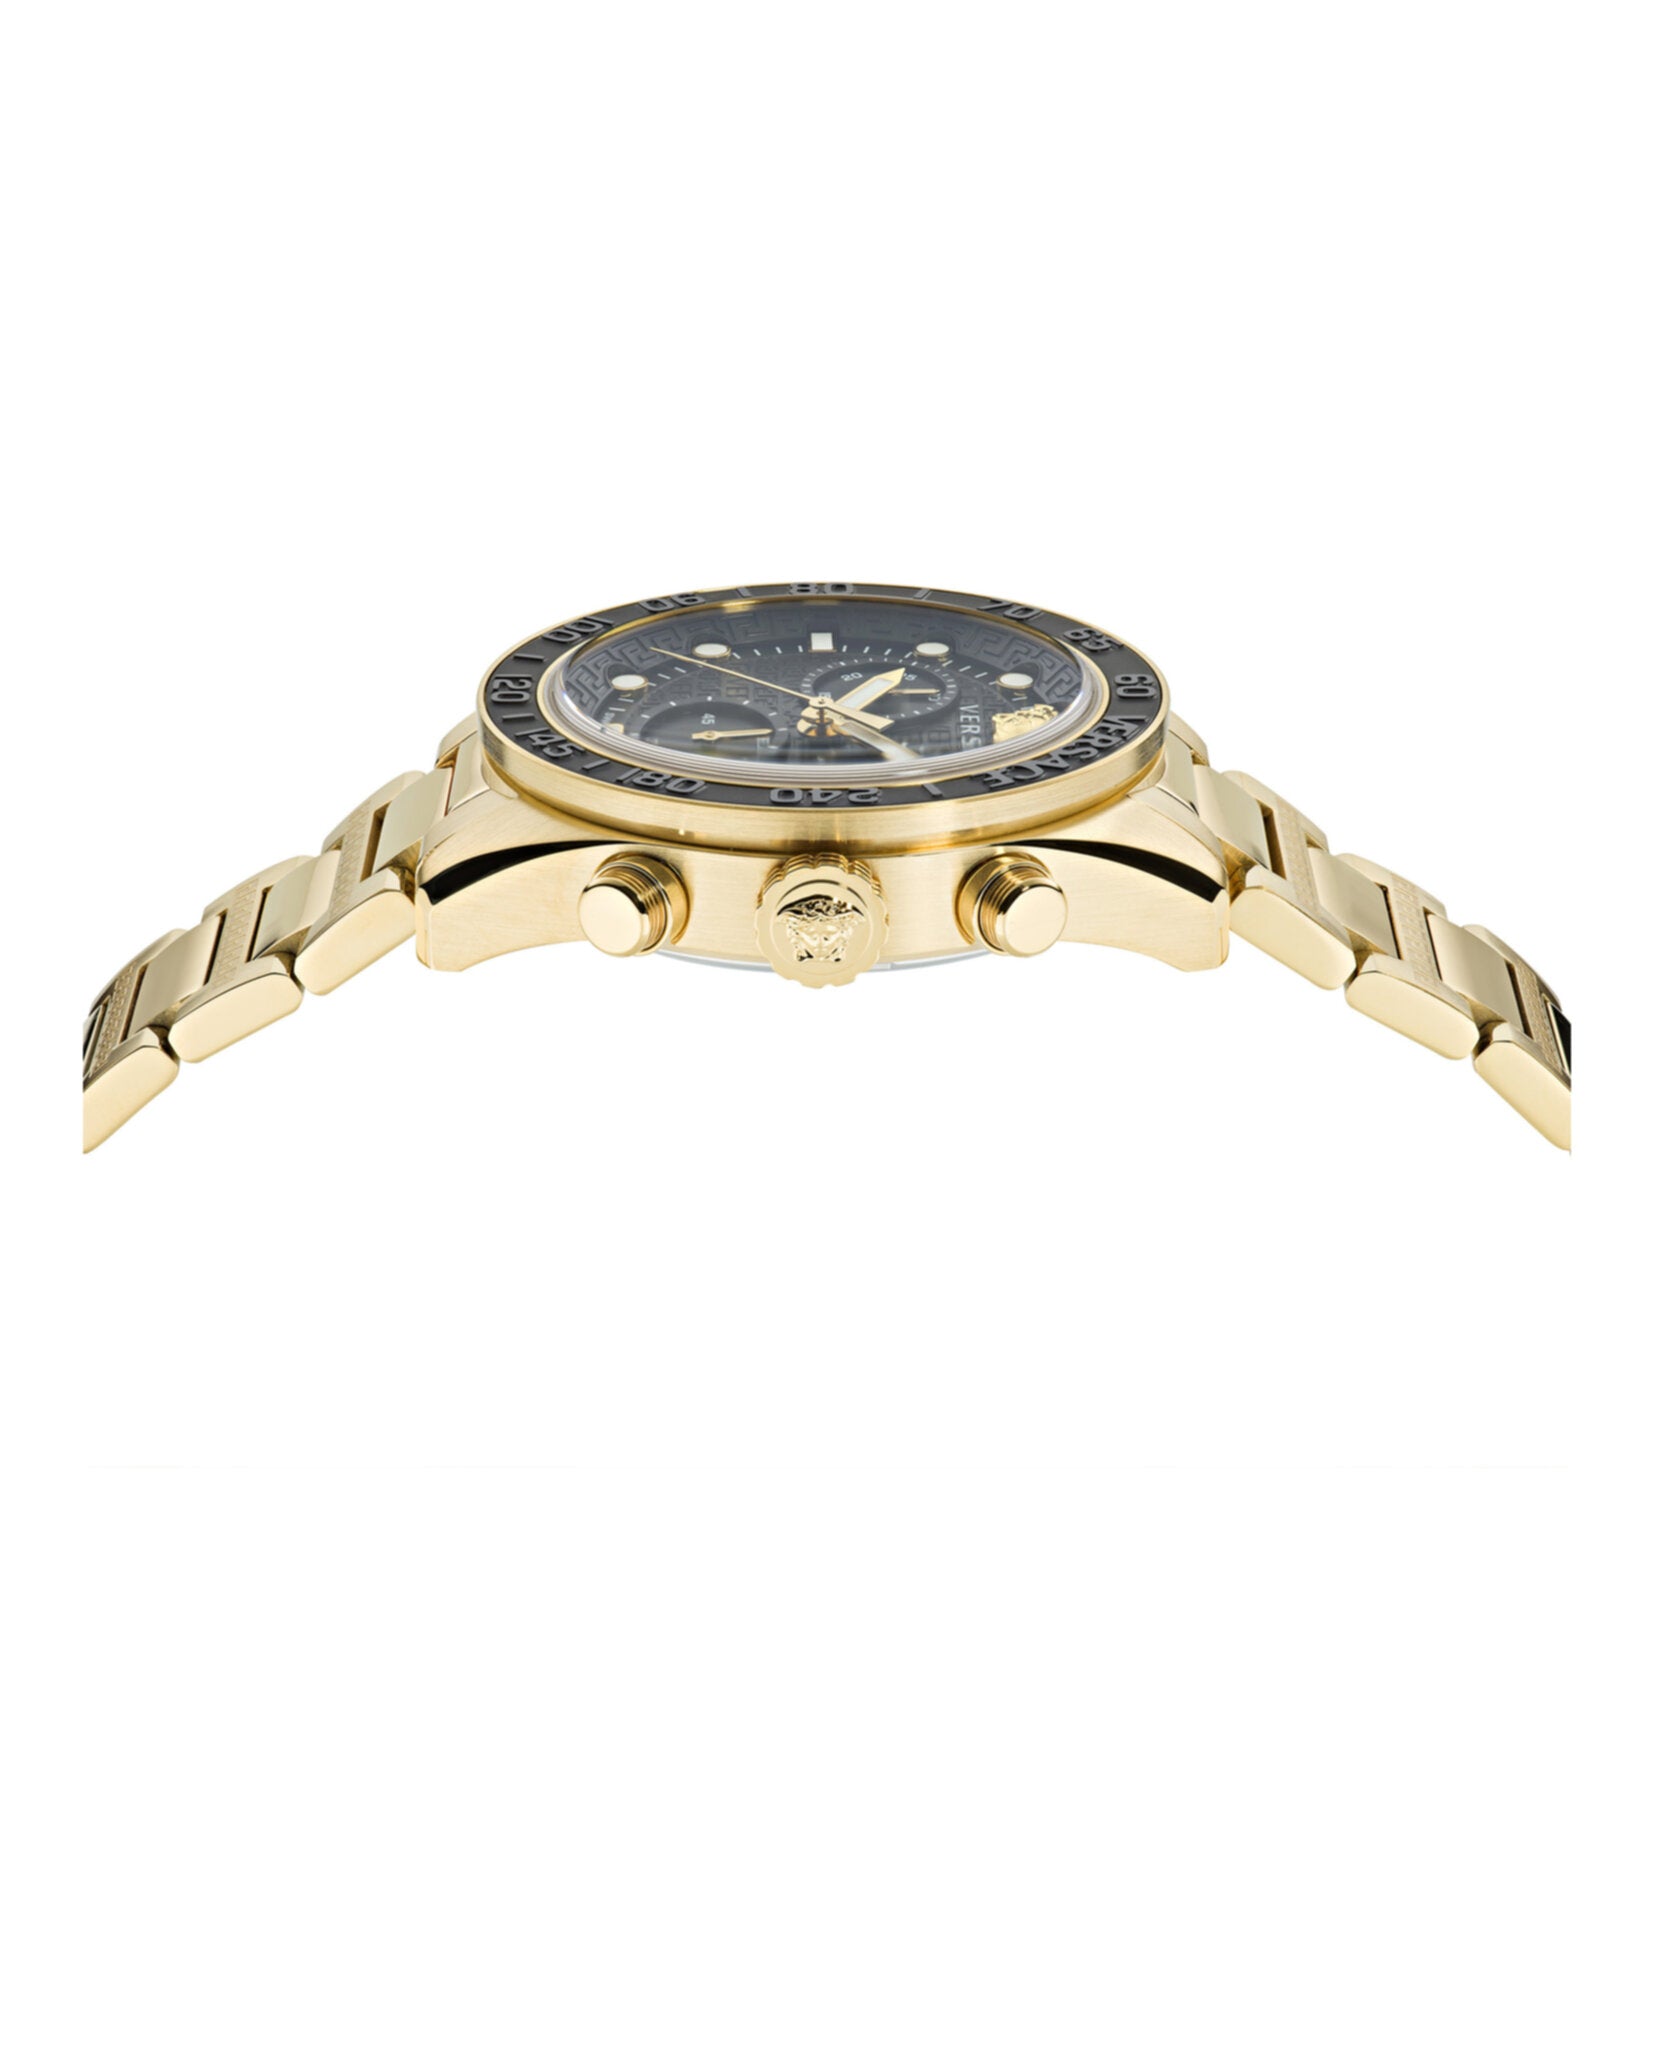 Versace Mens Greca Dome | Watches MadaLuxe Time Madaluxe – Time